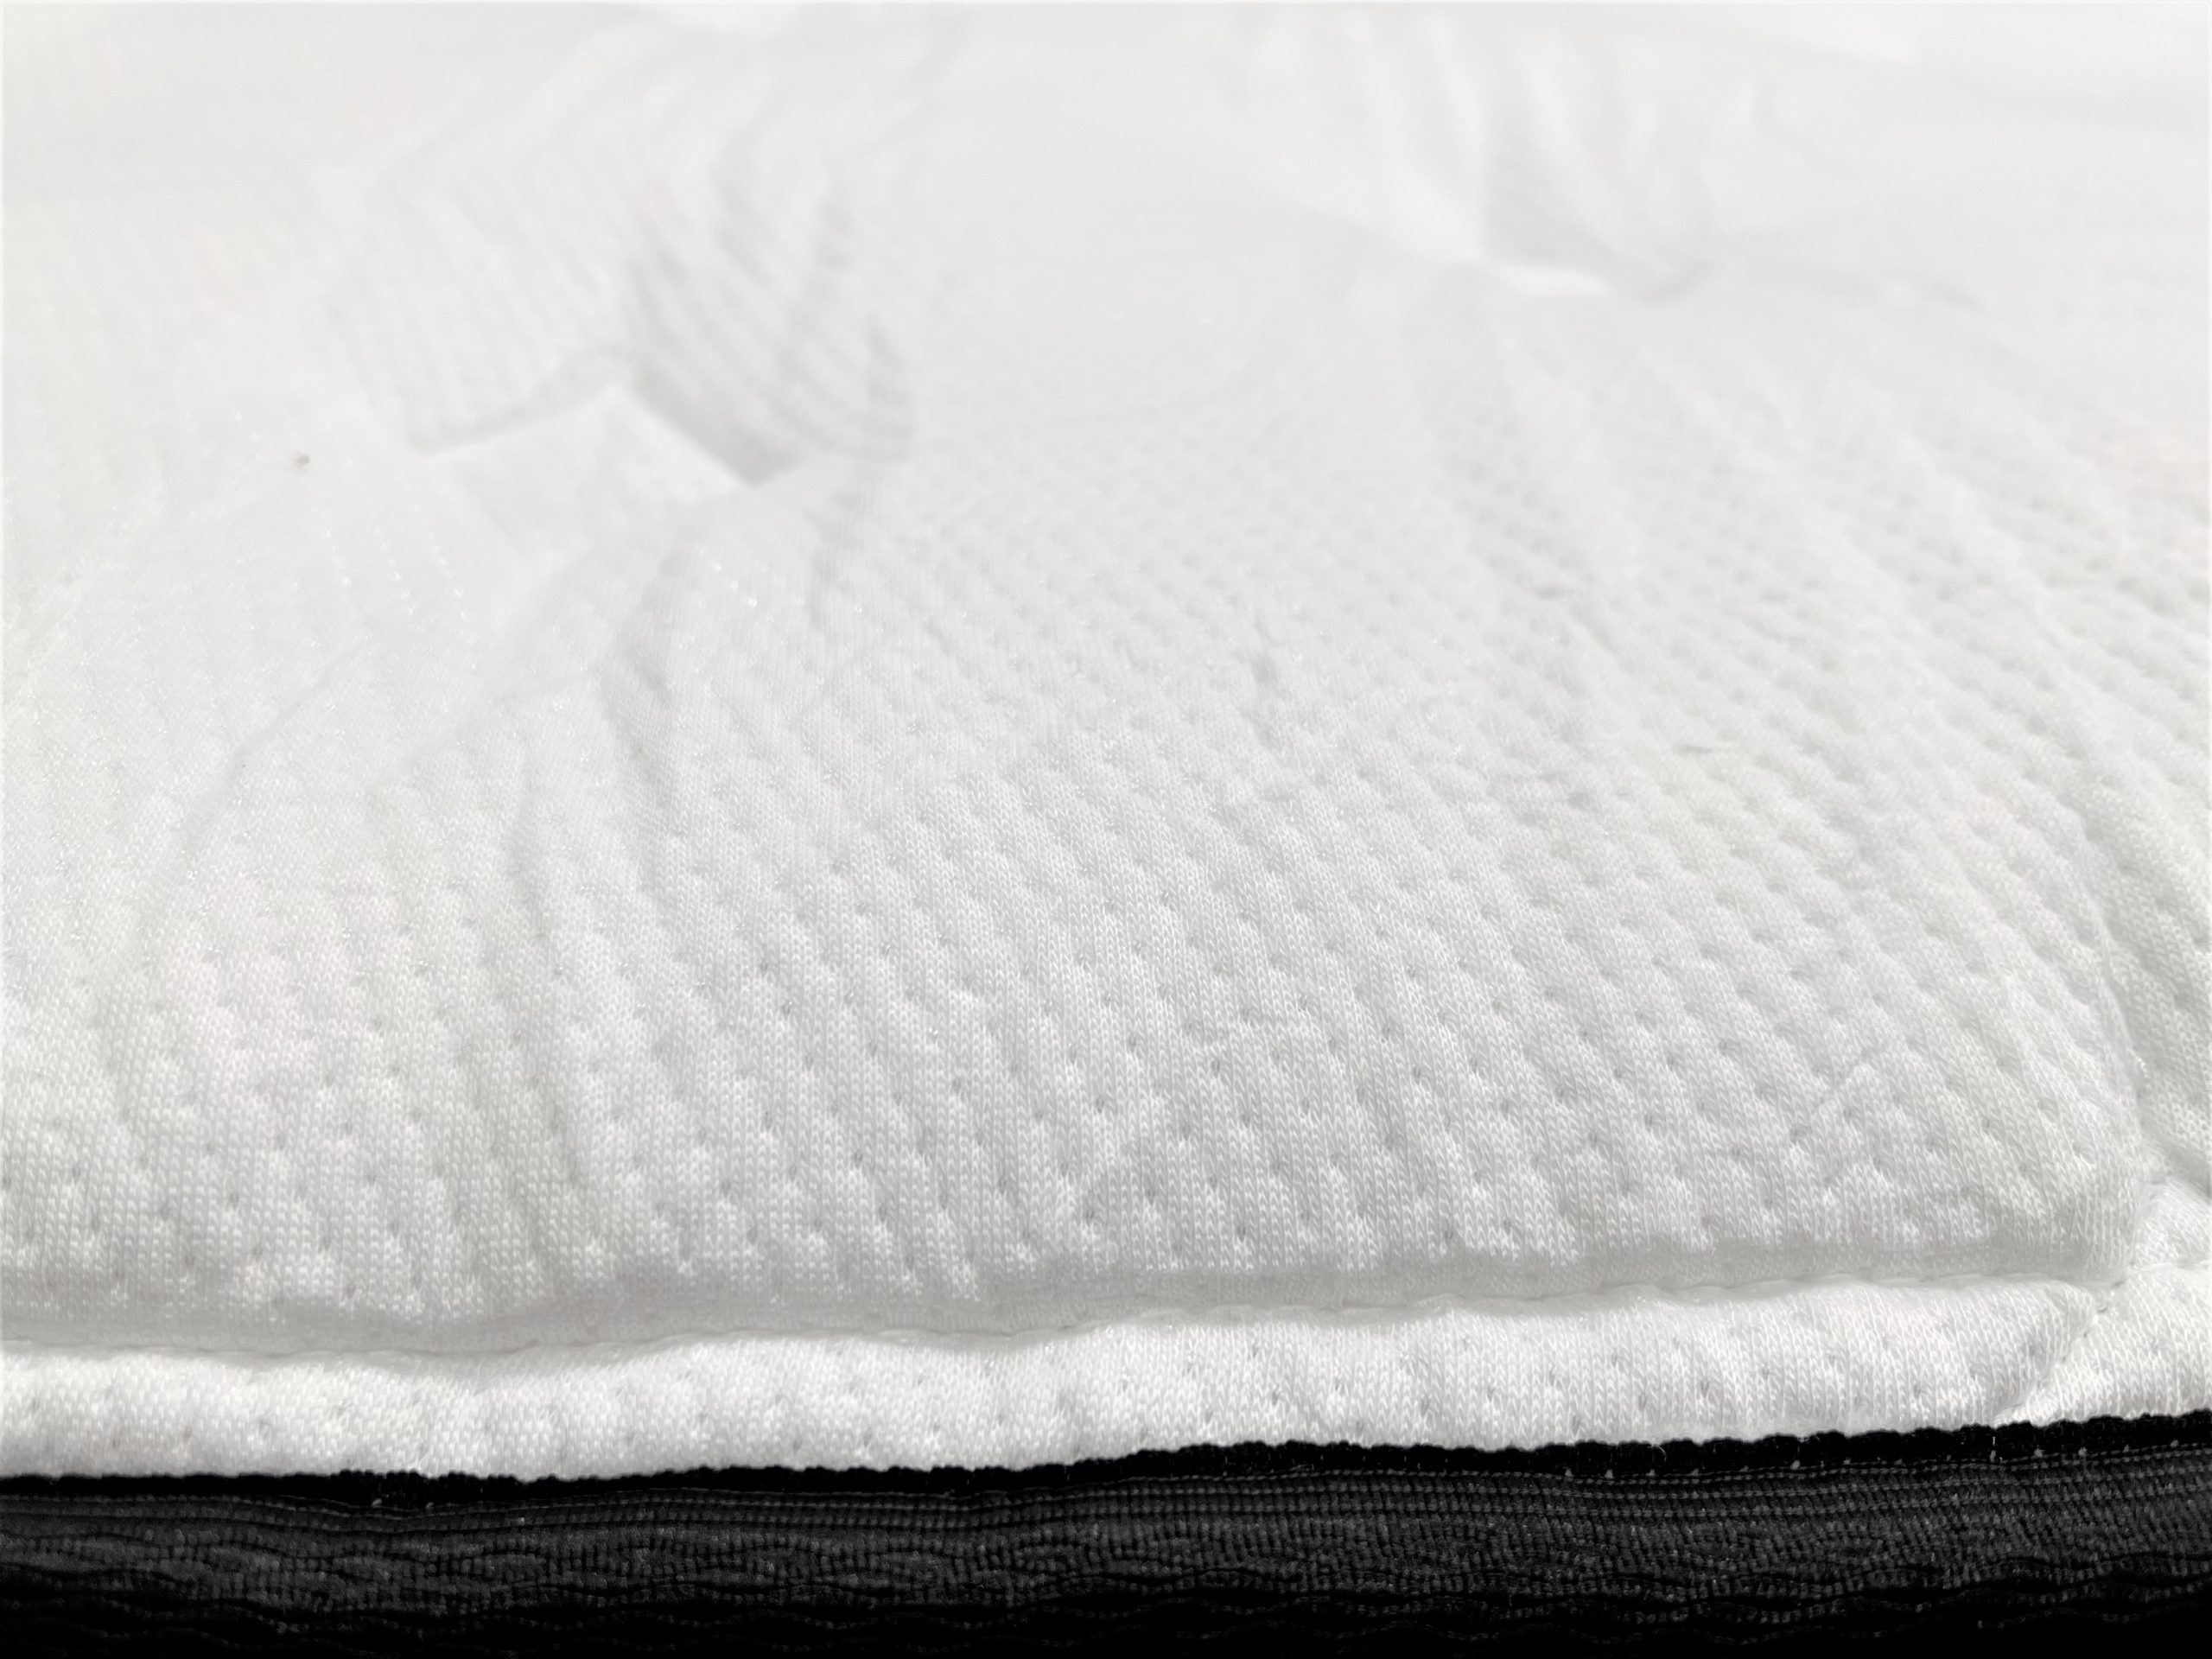 Image of the Silk and Snow Hybrid mattress cover fabric.